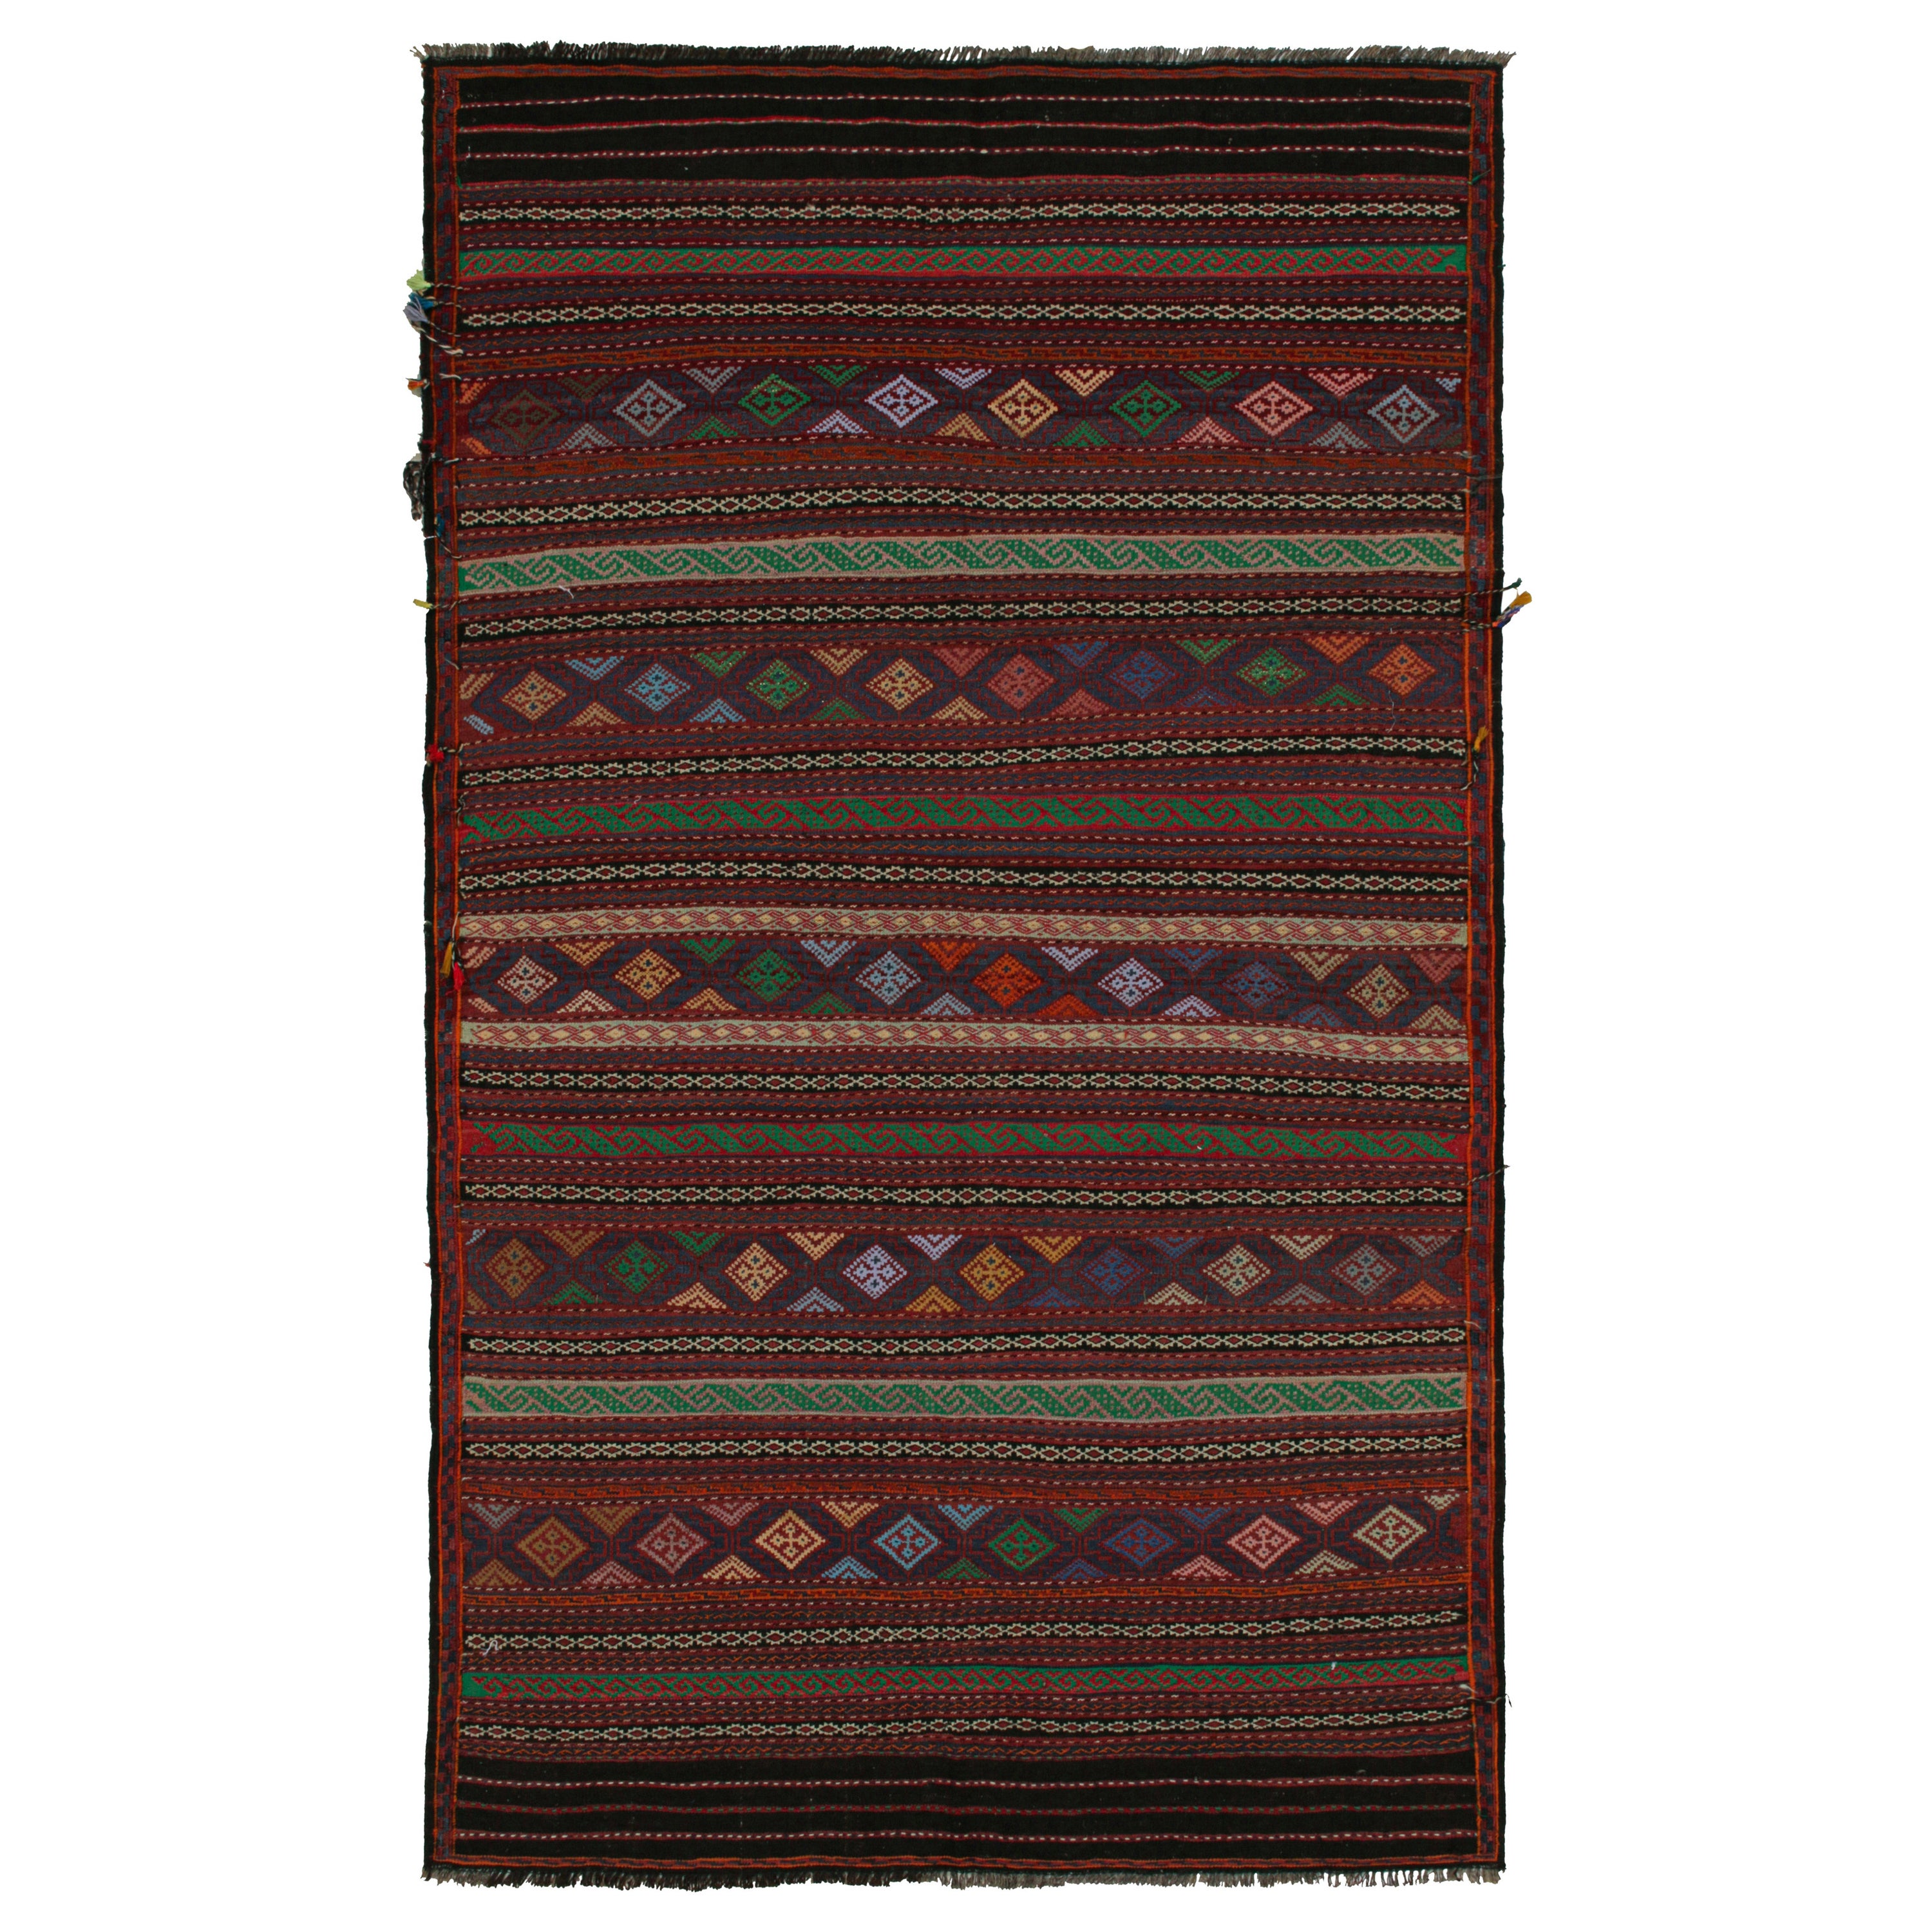 Vintage Baluch Tribal Kilim with Colorful Stripes & Motifs, from Rug & Kilim For Sale